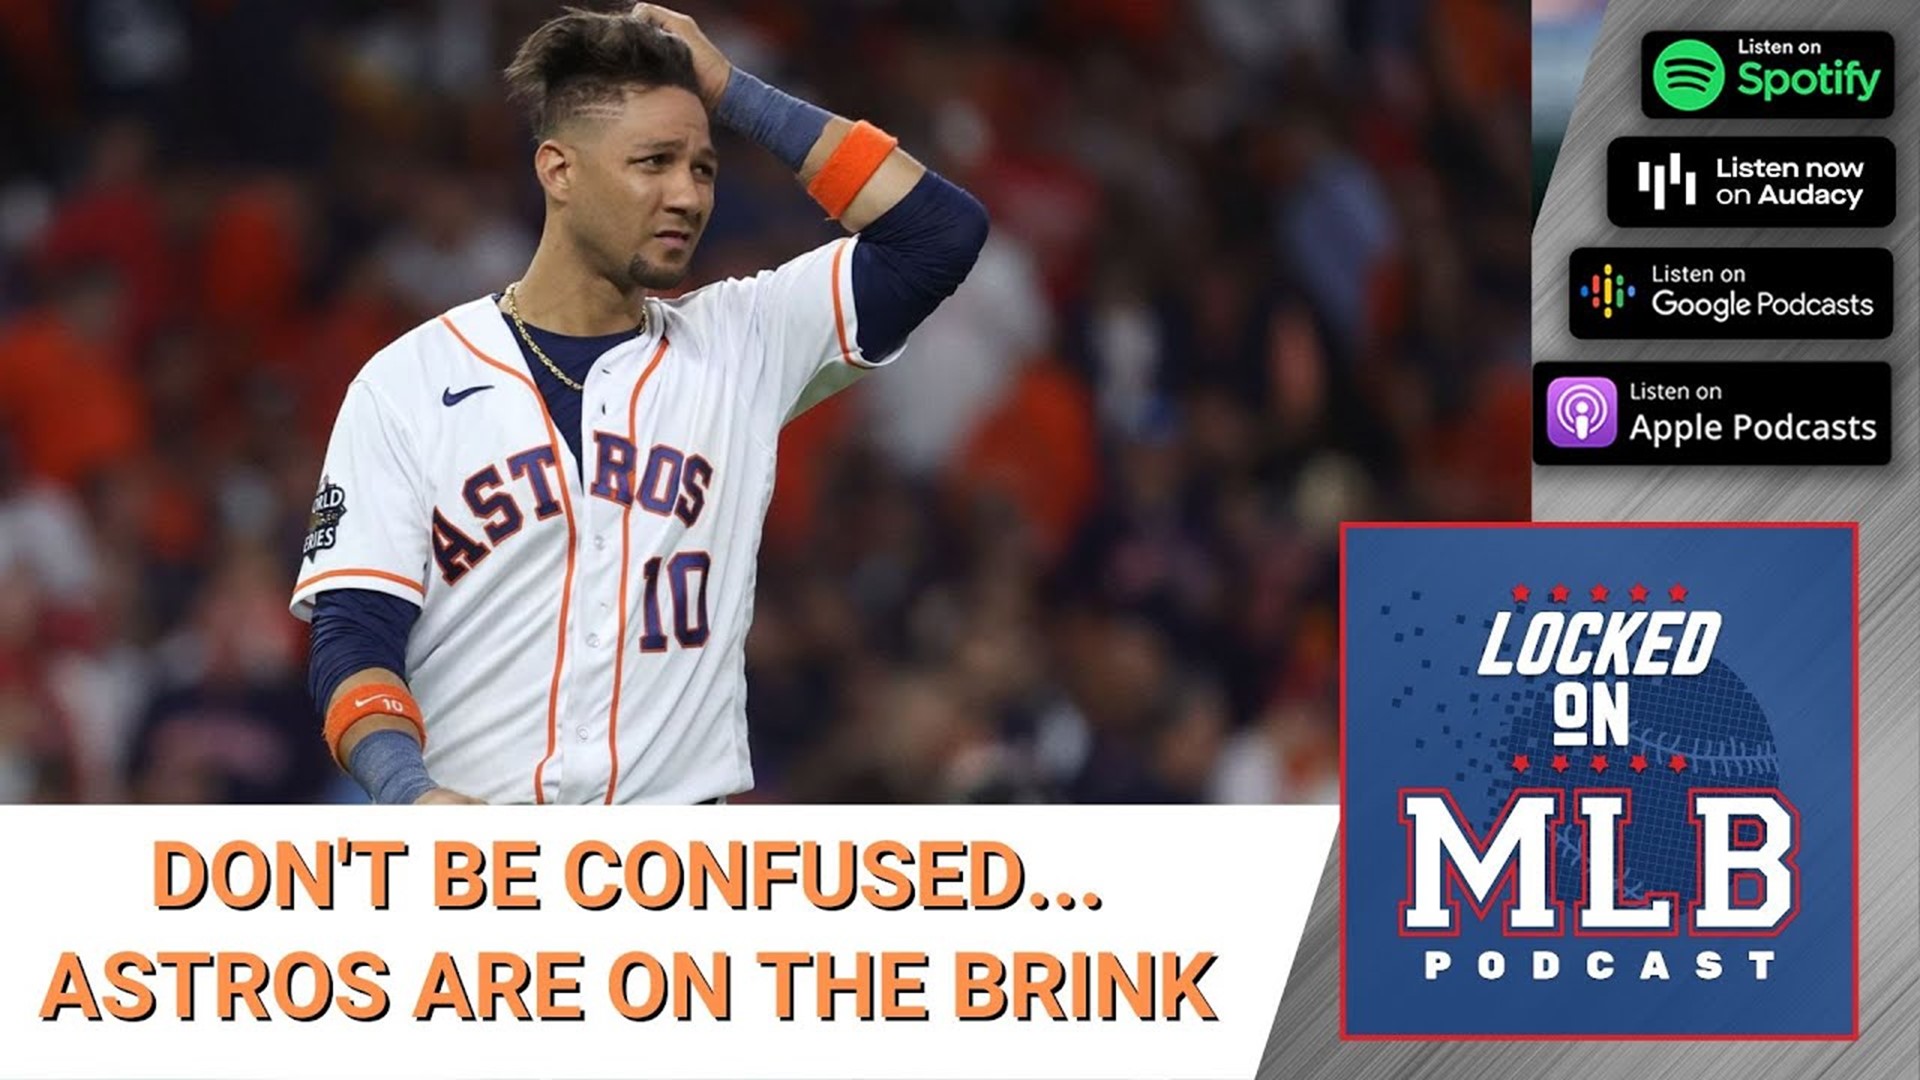 Locked on MLB - The Astros on the Brink of a Confusing Series